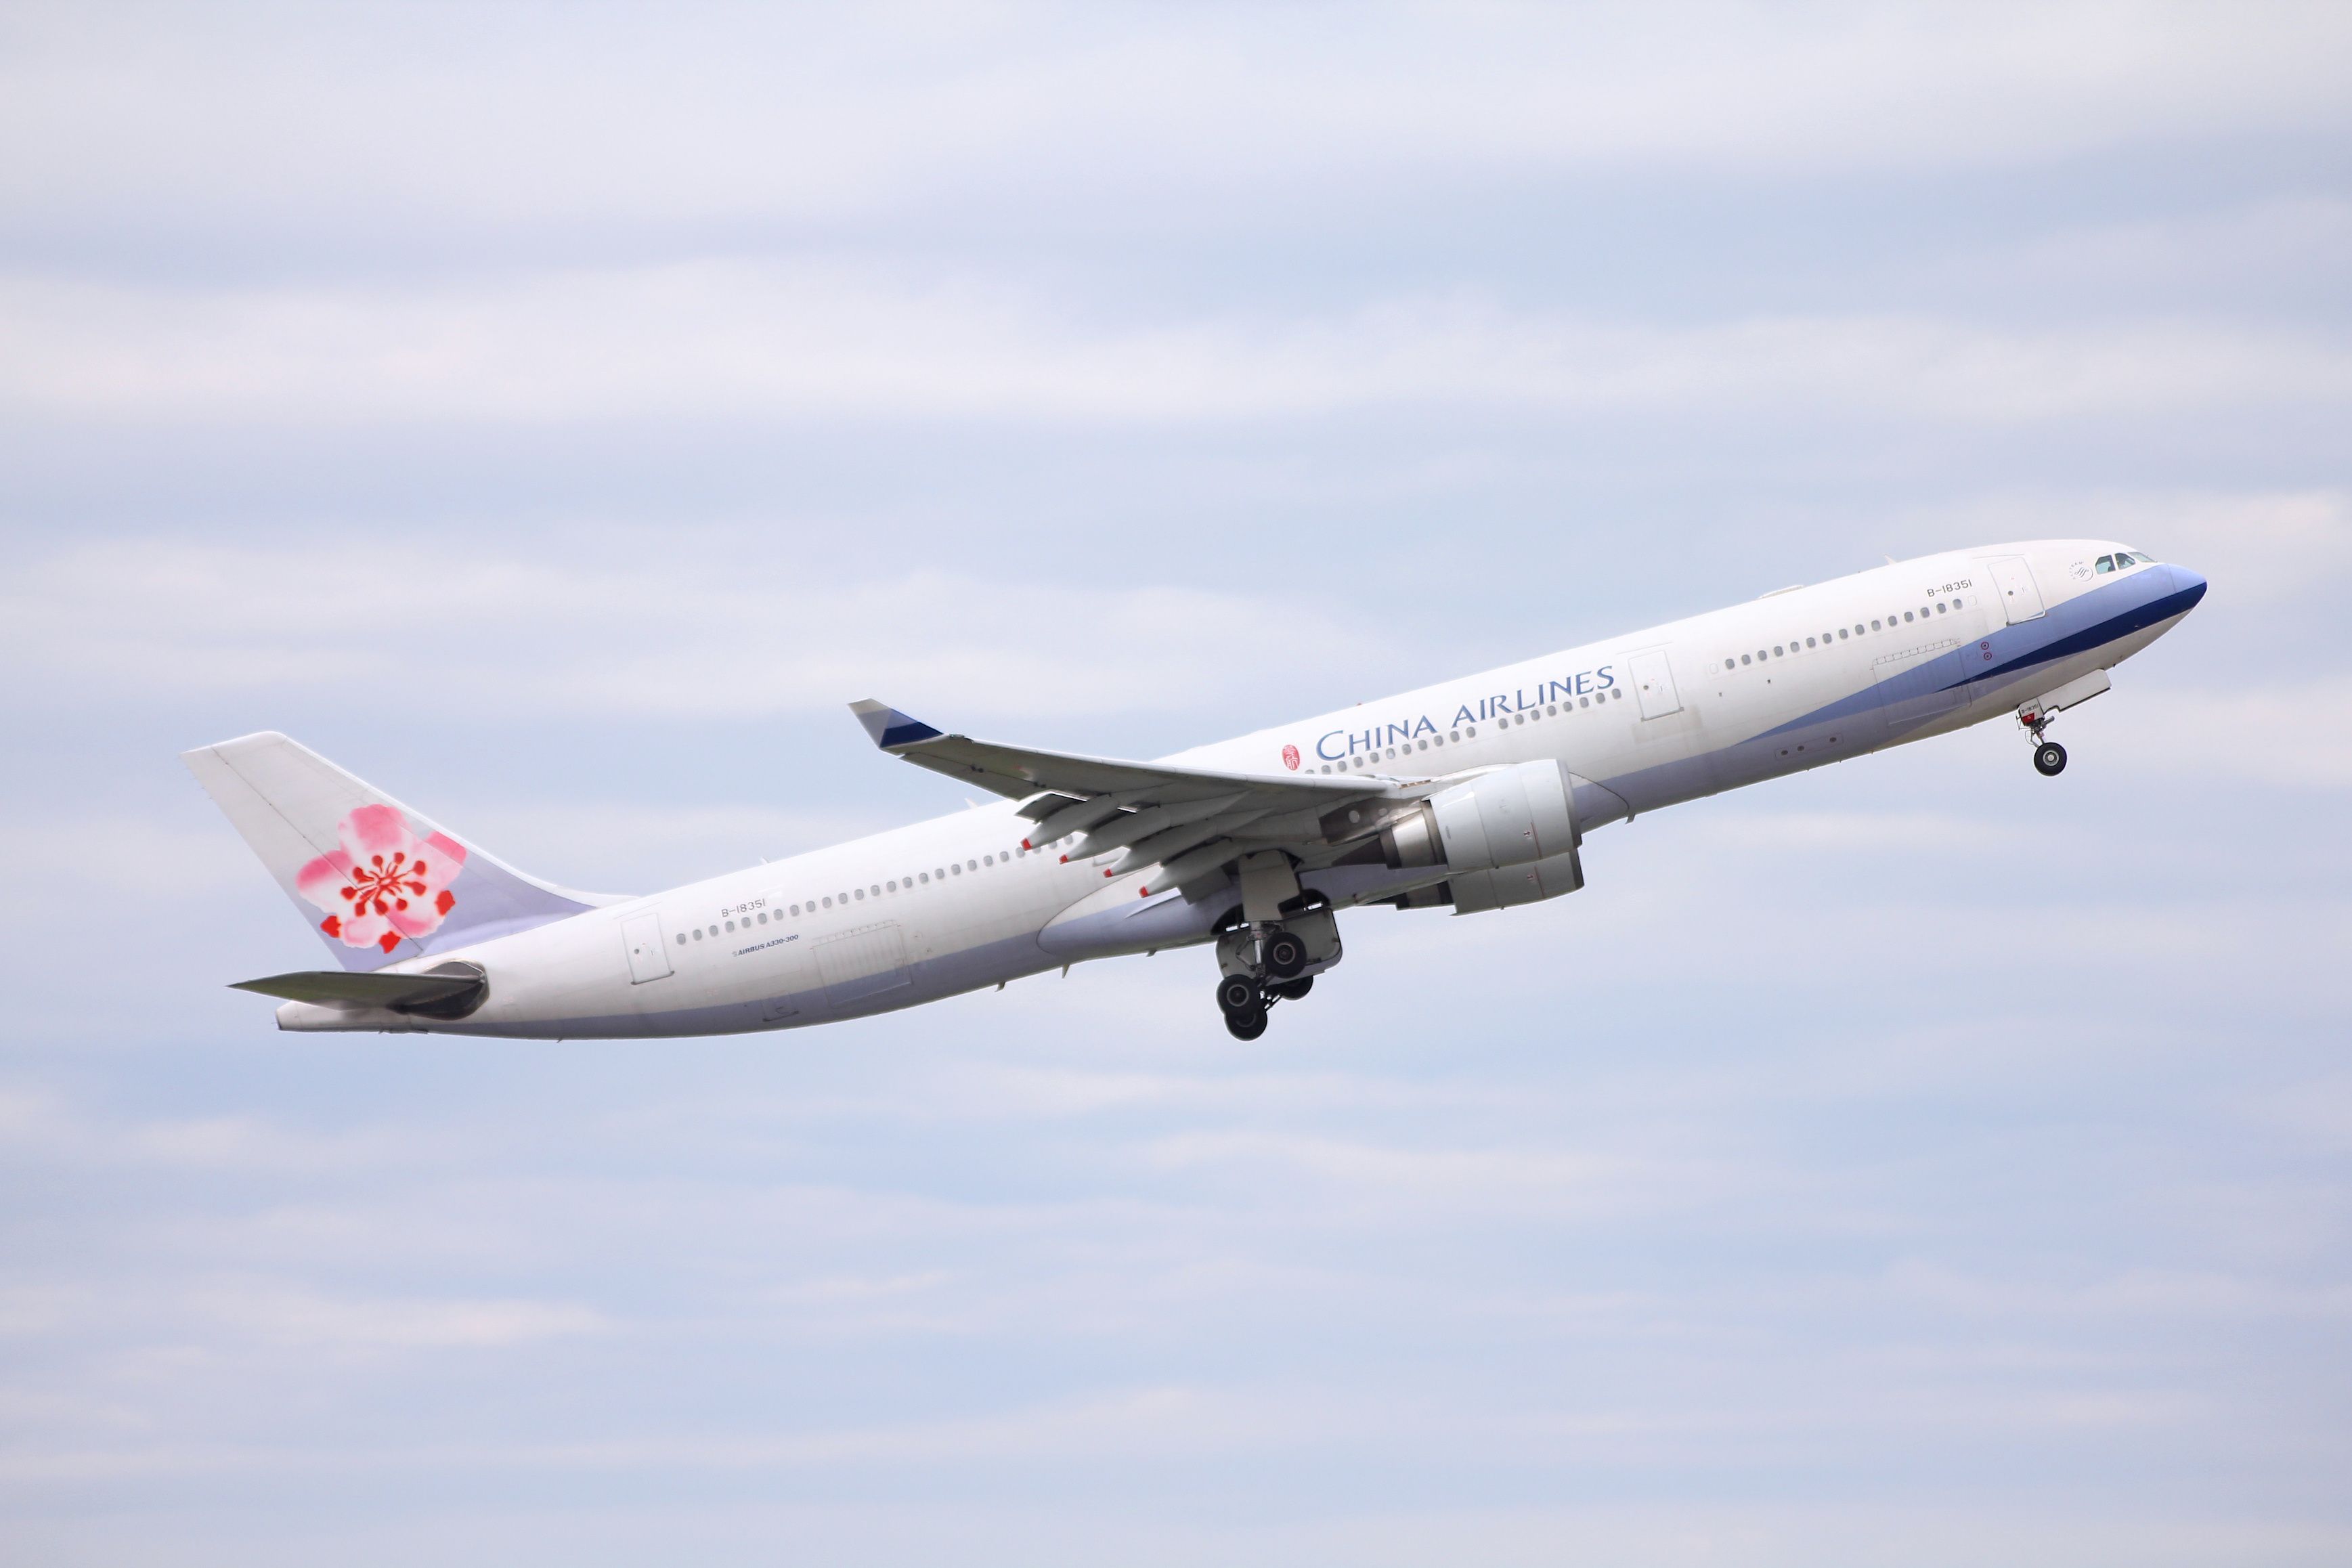 China Airlines Airbus A330-300